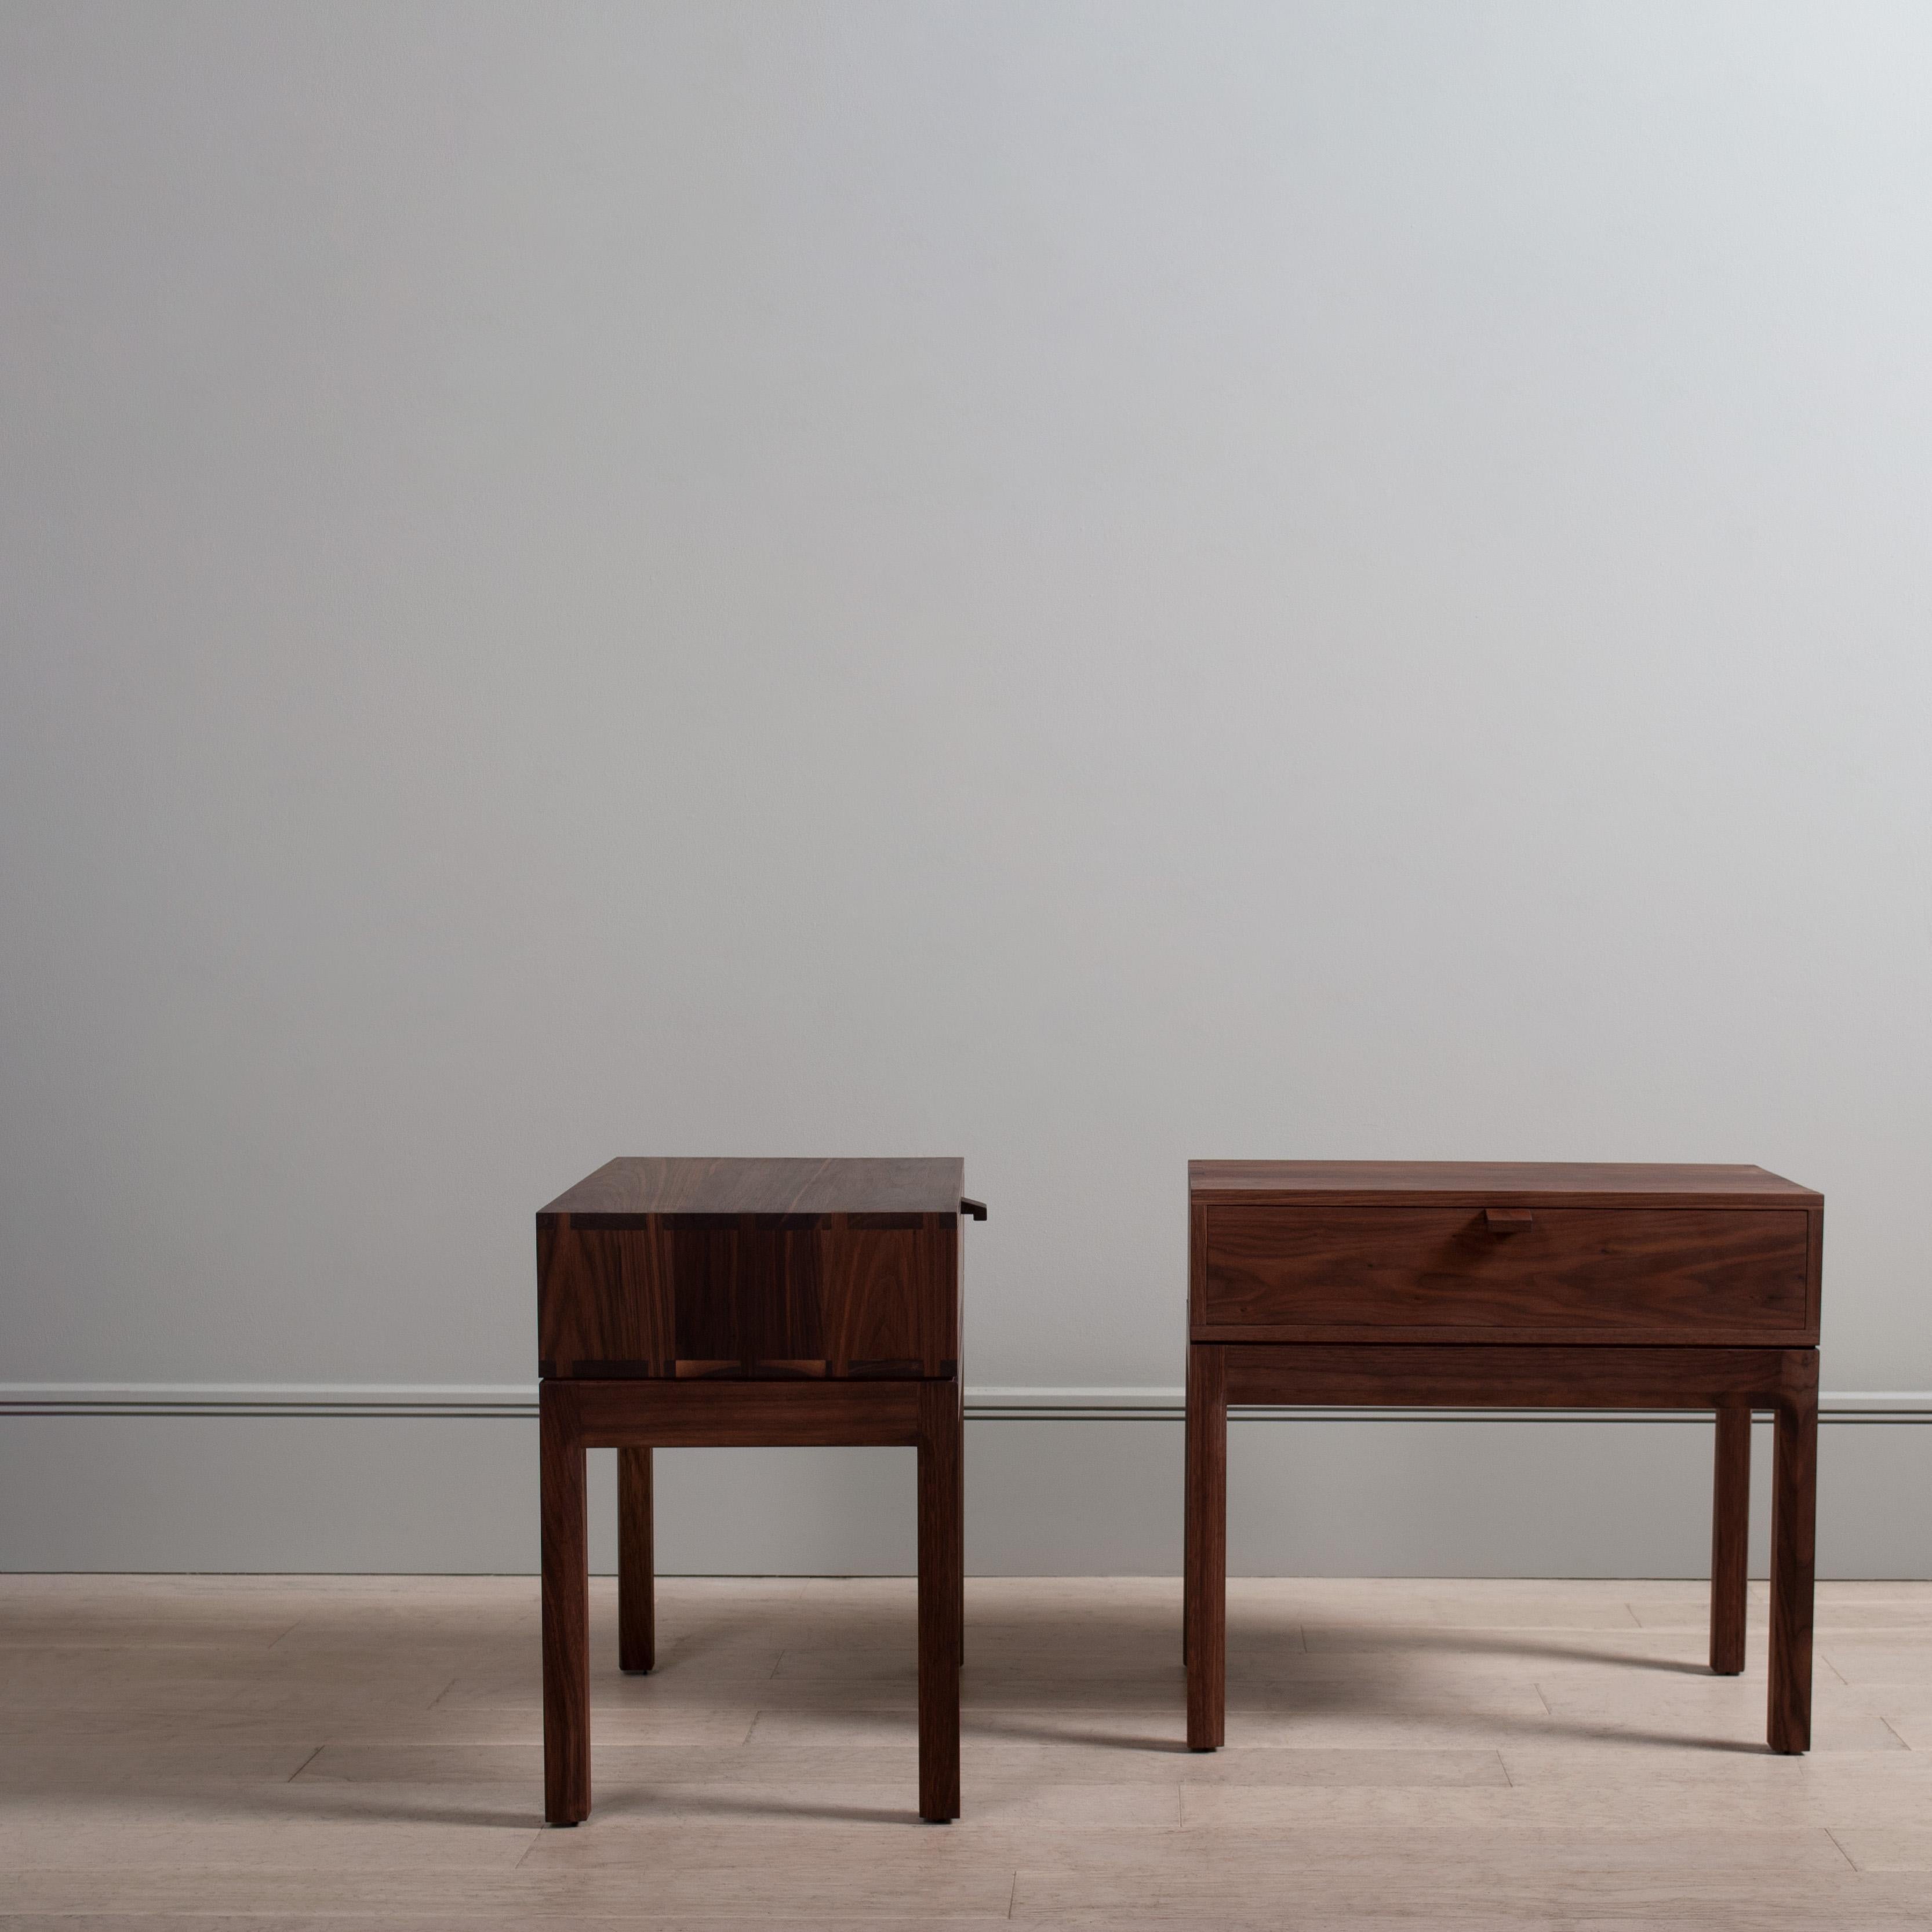 Handcrafted Walnut & Oak Nightstands, Bedside Tables In New Condition For Sale In London, GB